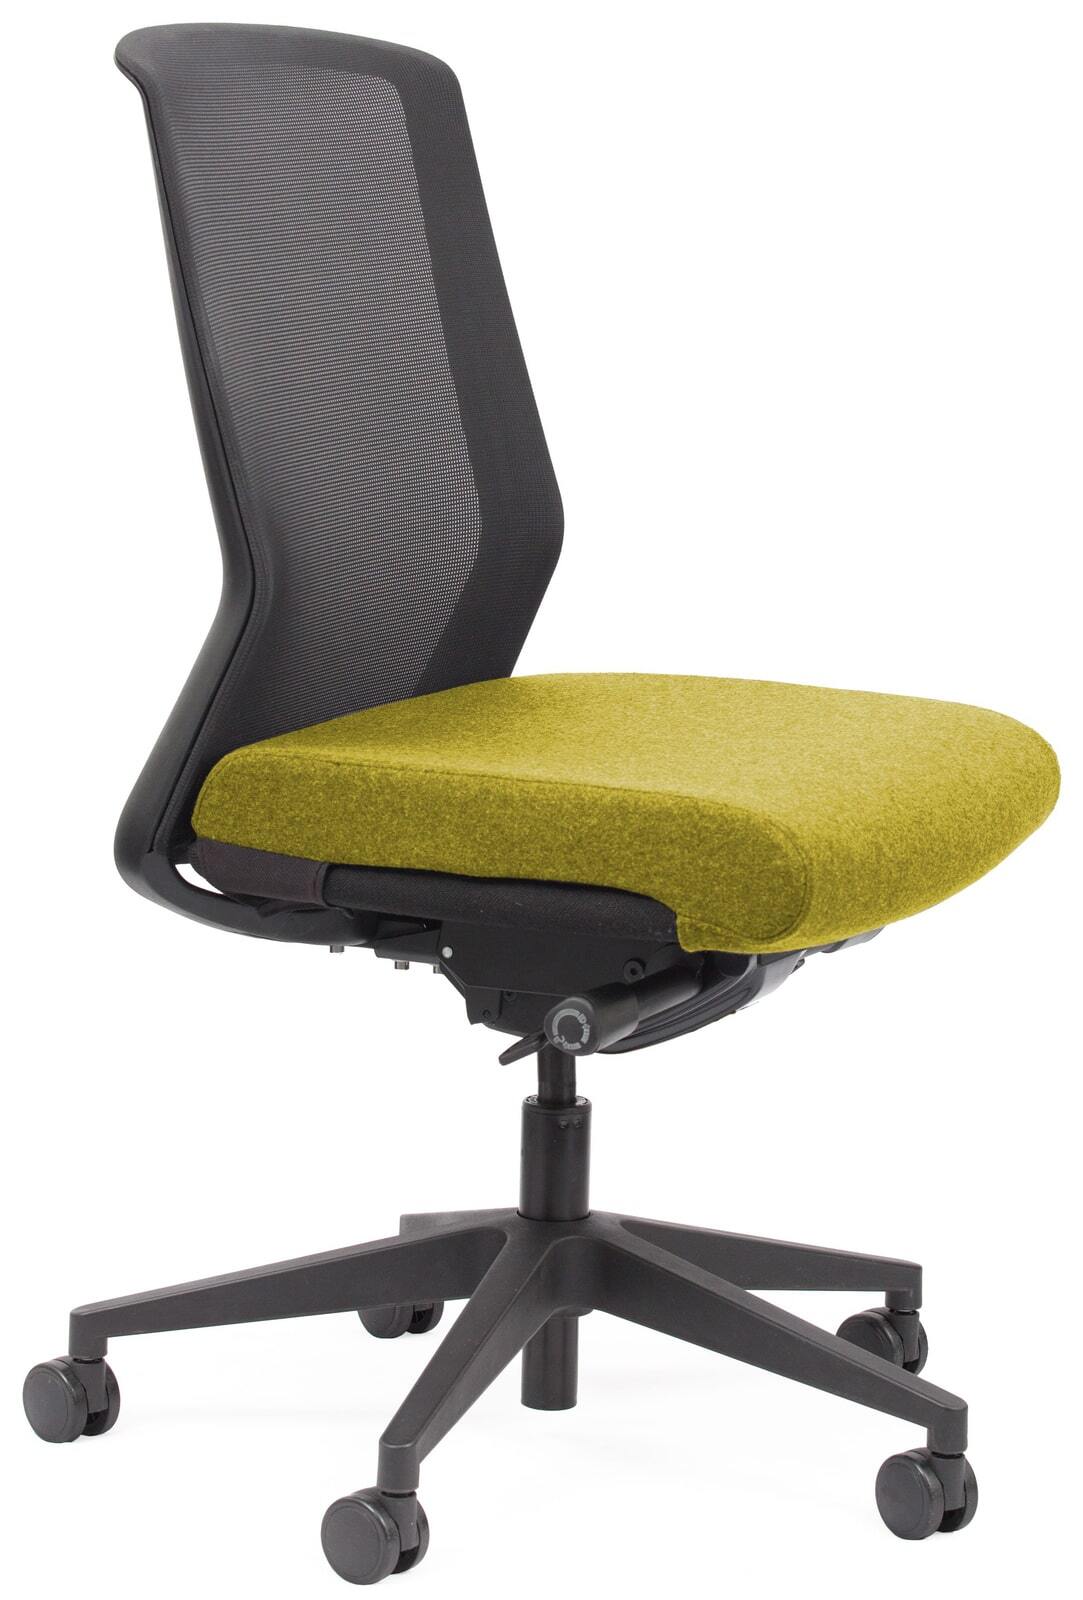 motion sync black mesh ergonomic office chair yellow seat cover  office  stock